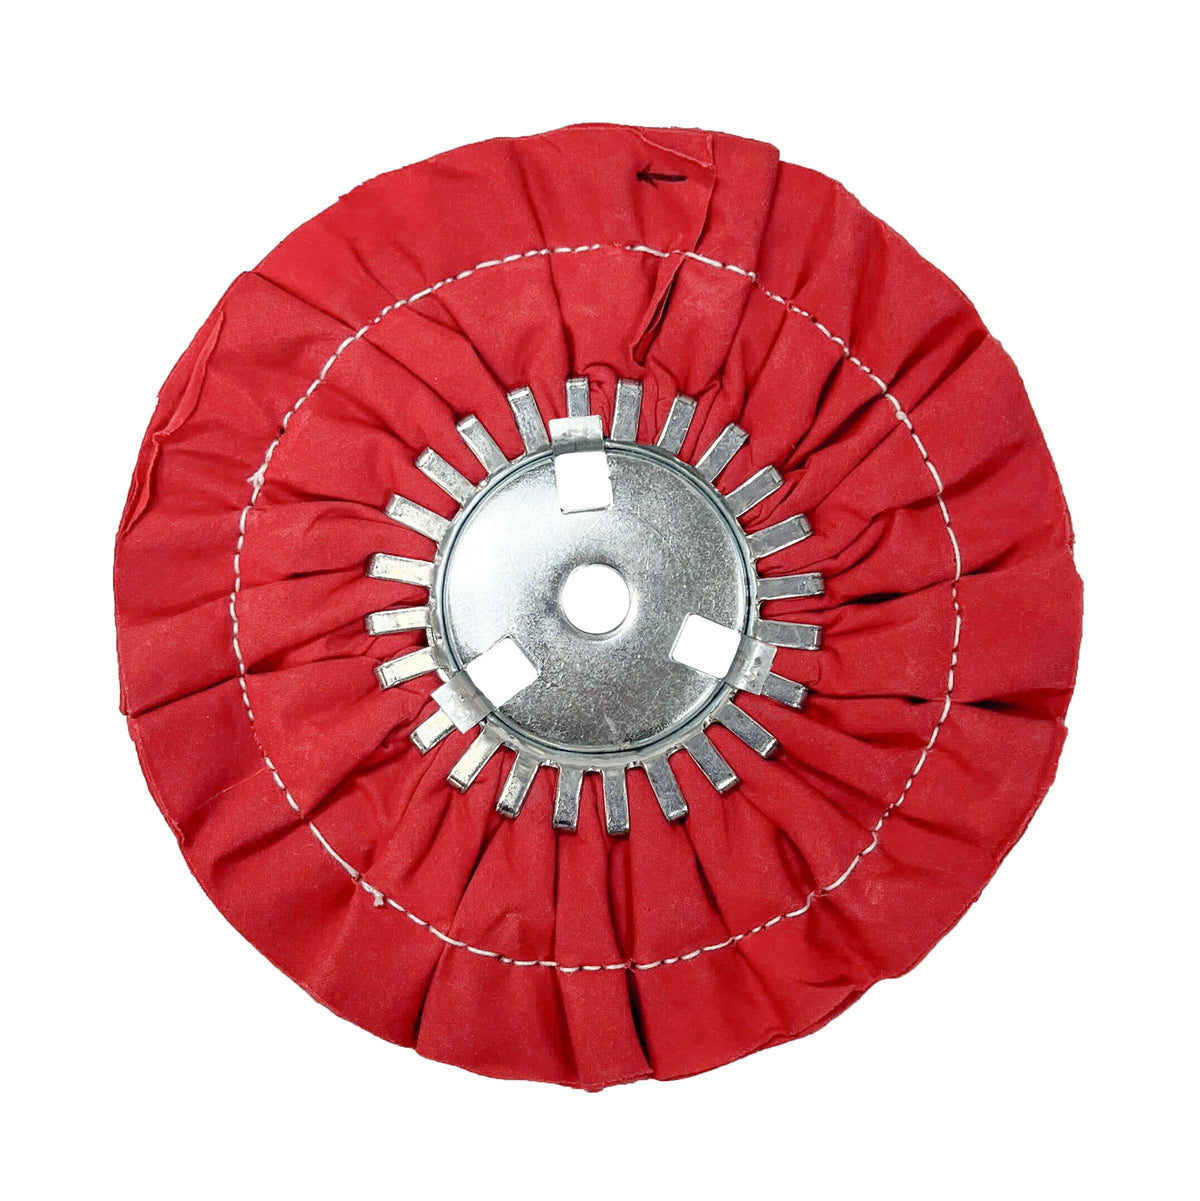 Renegade Products USA&#39;s red 9&quot; stitched airway buffing wheels with center plate, delivering professional-grade buffing and polishing performance